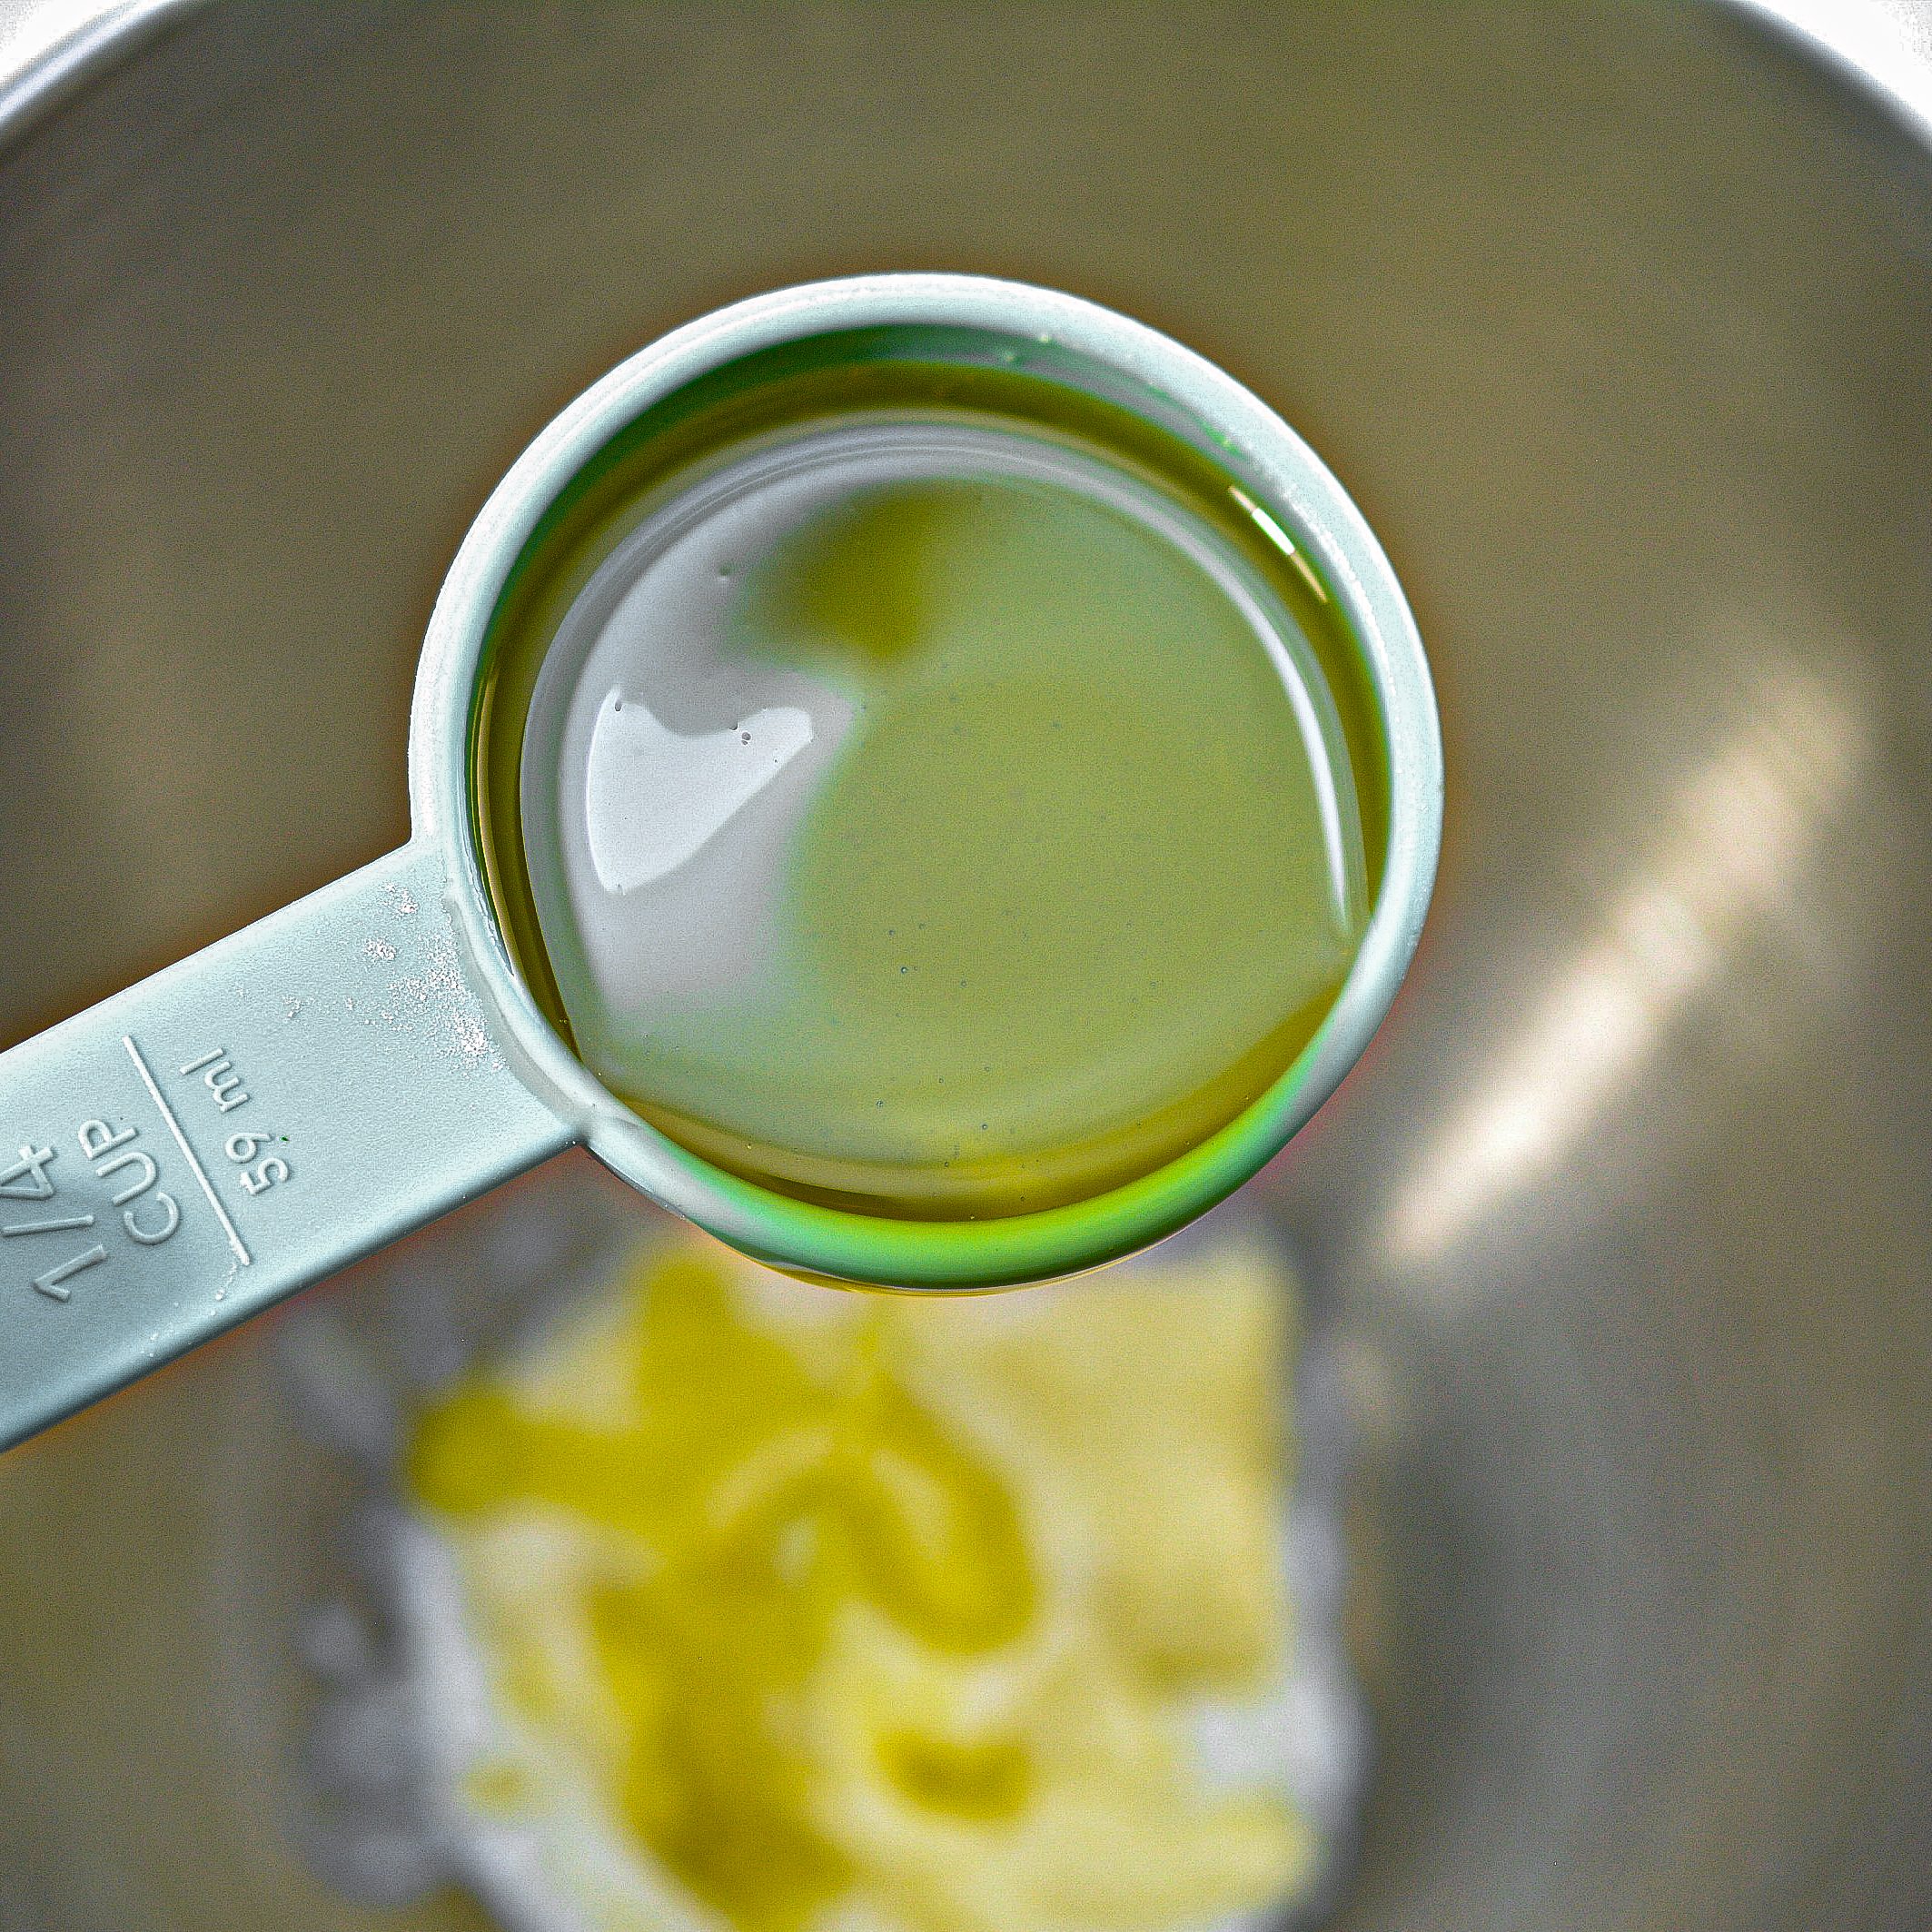 In a mixing bowl, beat together the butter, oil, and sugars until well combined and fluffy.